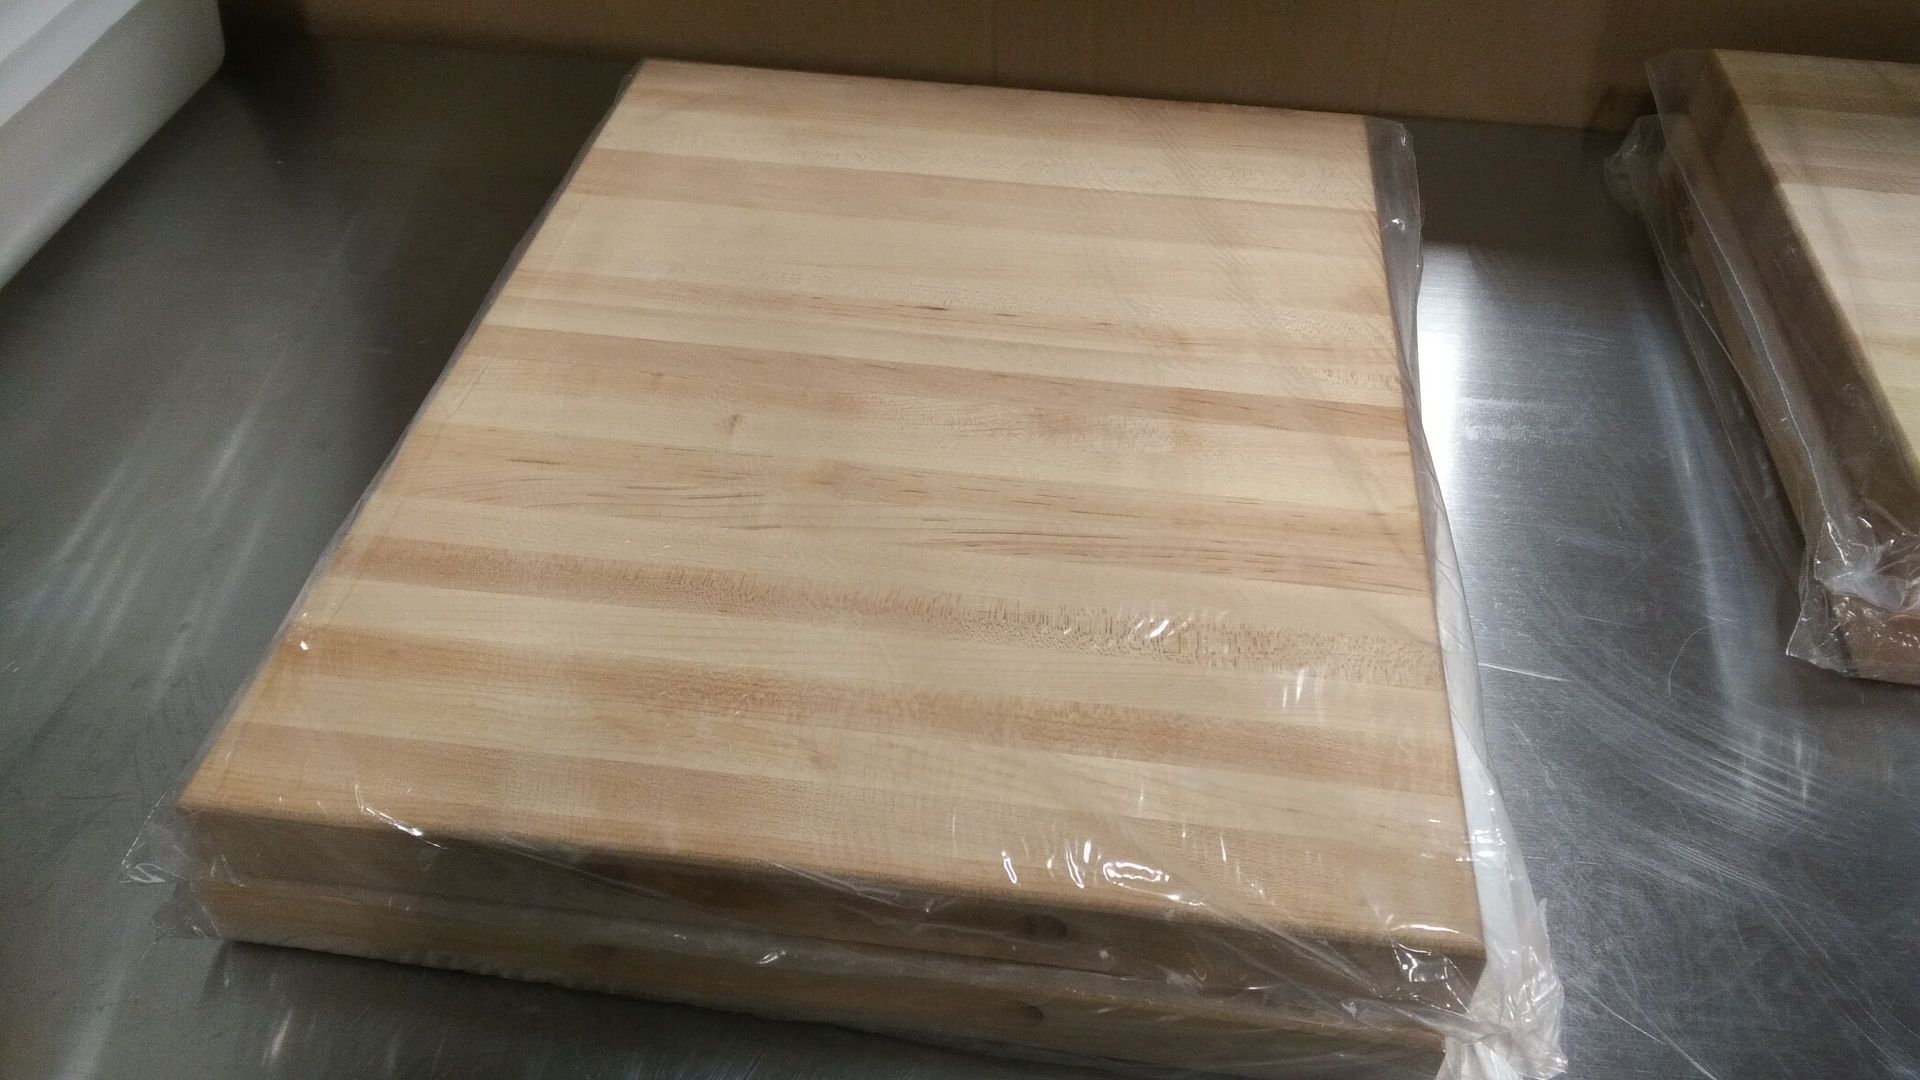 20" x 15" x 1.5" Hard Canadian Maple Carving Board